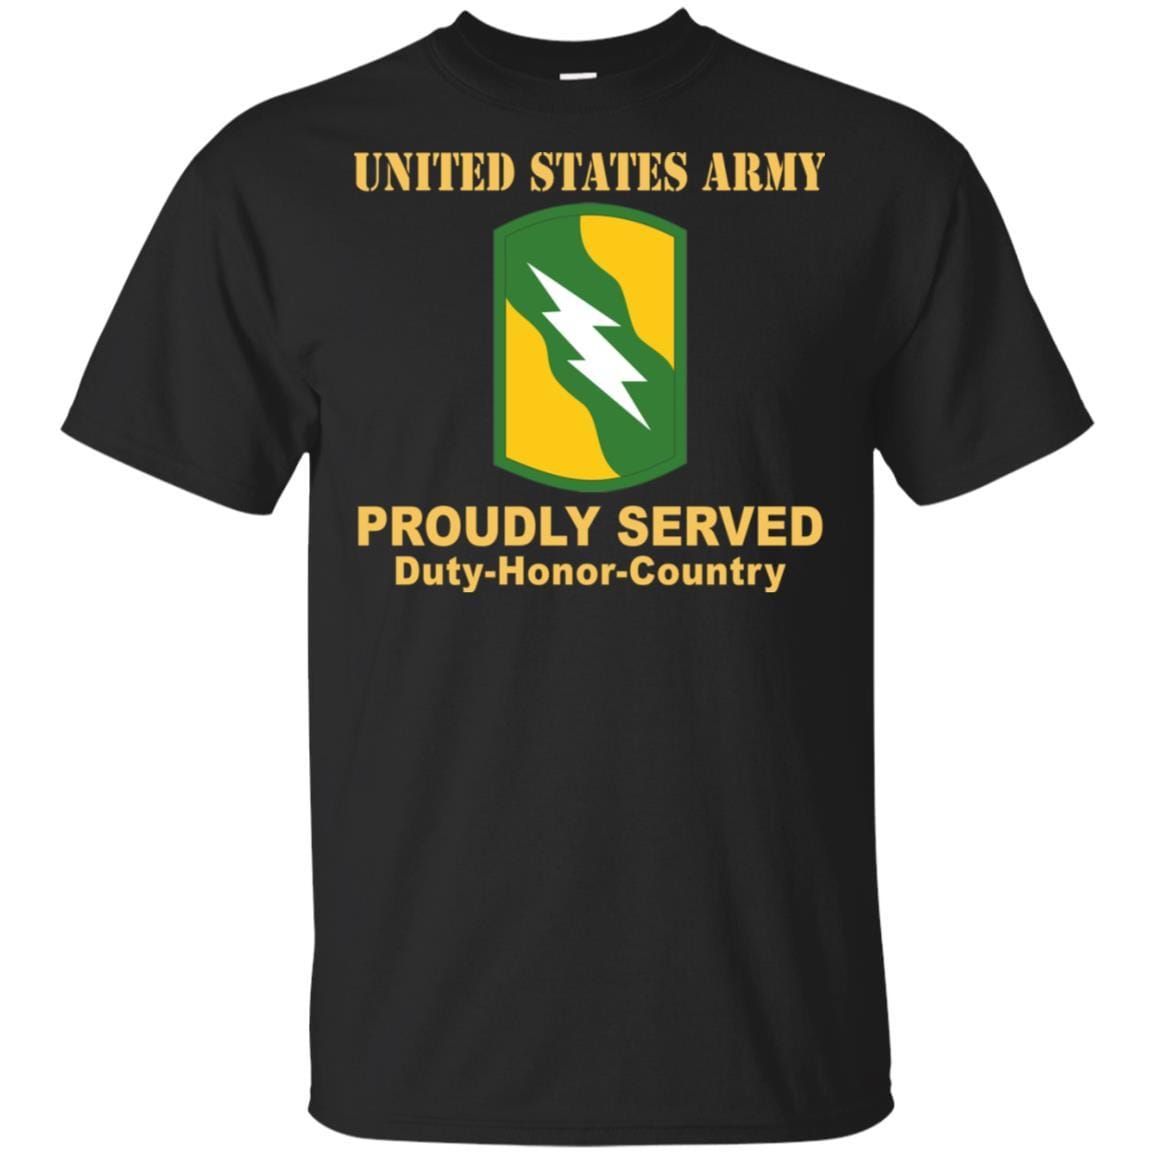 US ARMY 155TH ARMORED BRIGADE COMBAT TEAM- Proudly Served T-Shirt On Front For Men-TShirt-Army-Veterans Nation